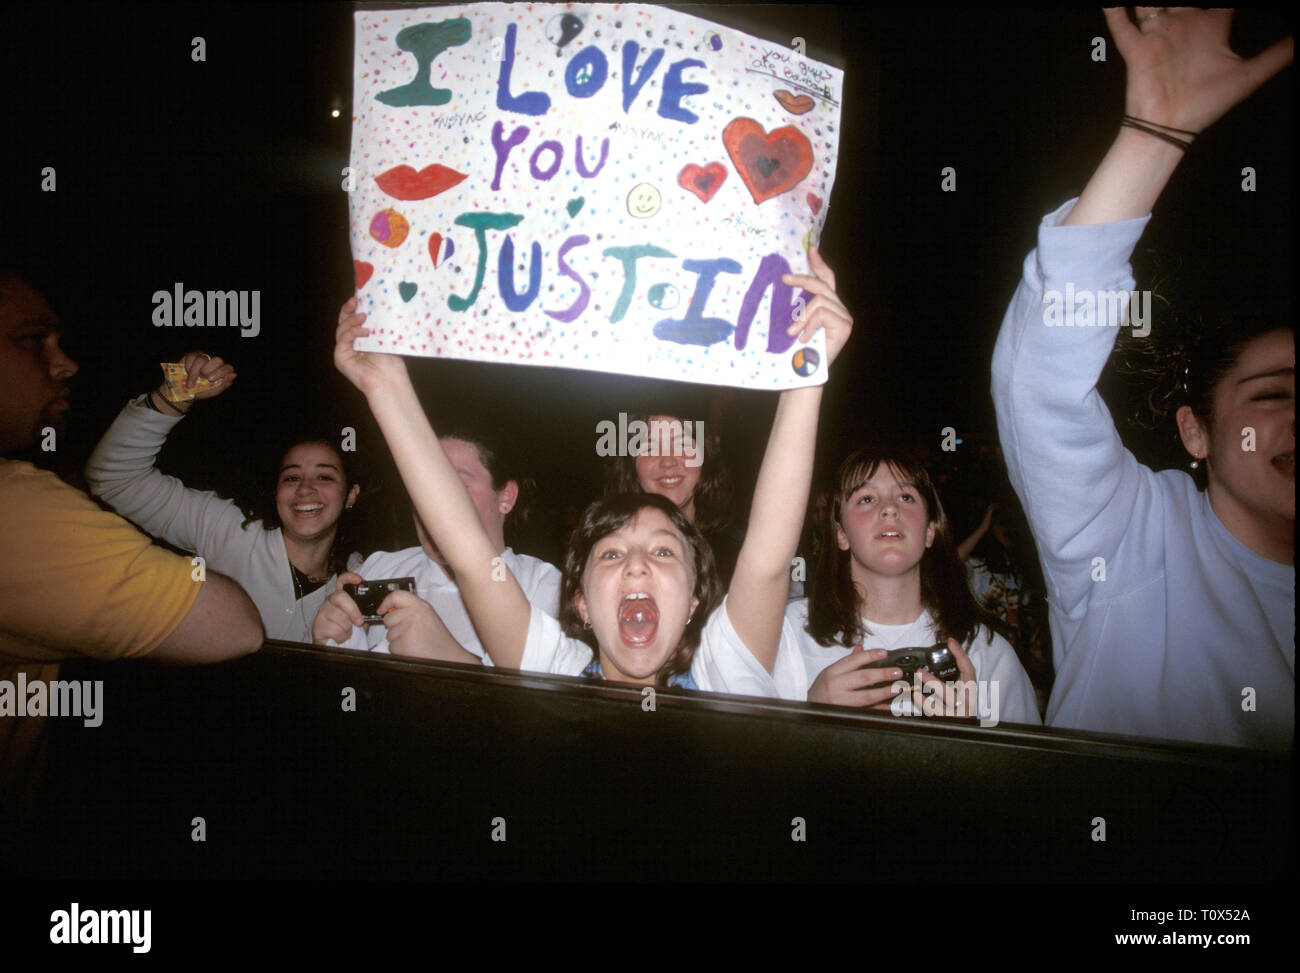 A front row fan shows her interest in Justin Timberlake during a 'live'  concert performance. Stock Photo